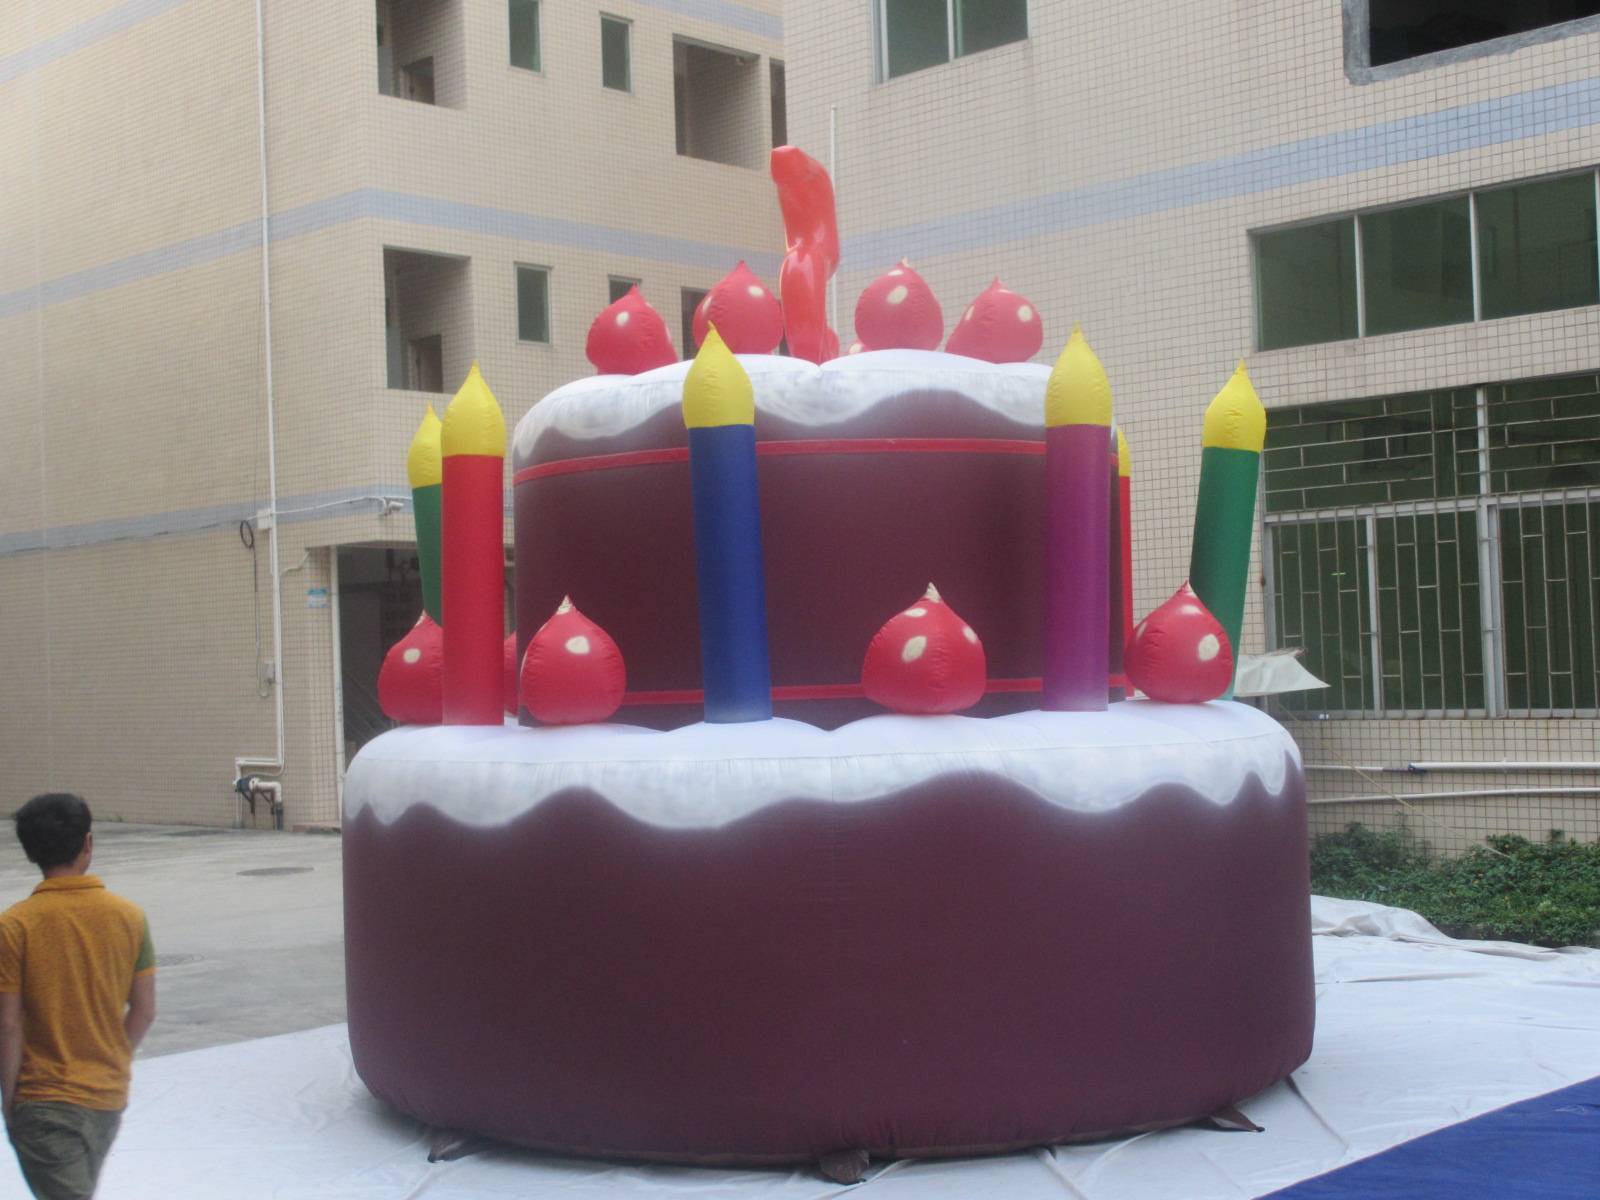 Customised Festival Inflatable Birthday Cake Replica Balloon For Attractive Gift, Love,Heart